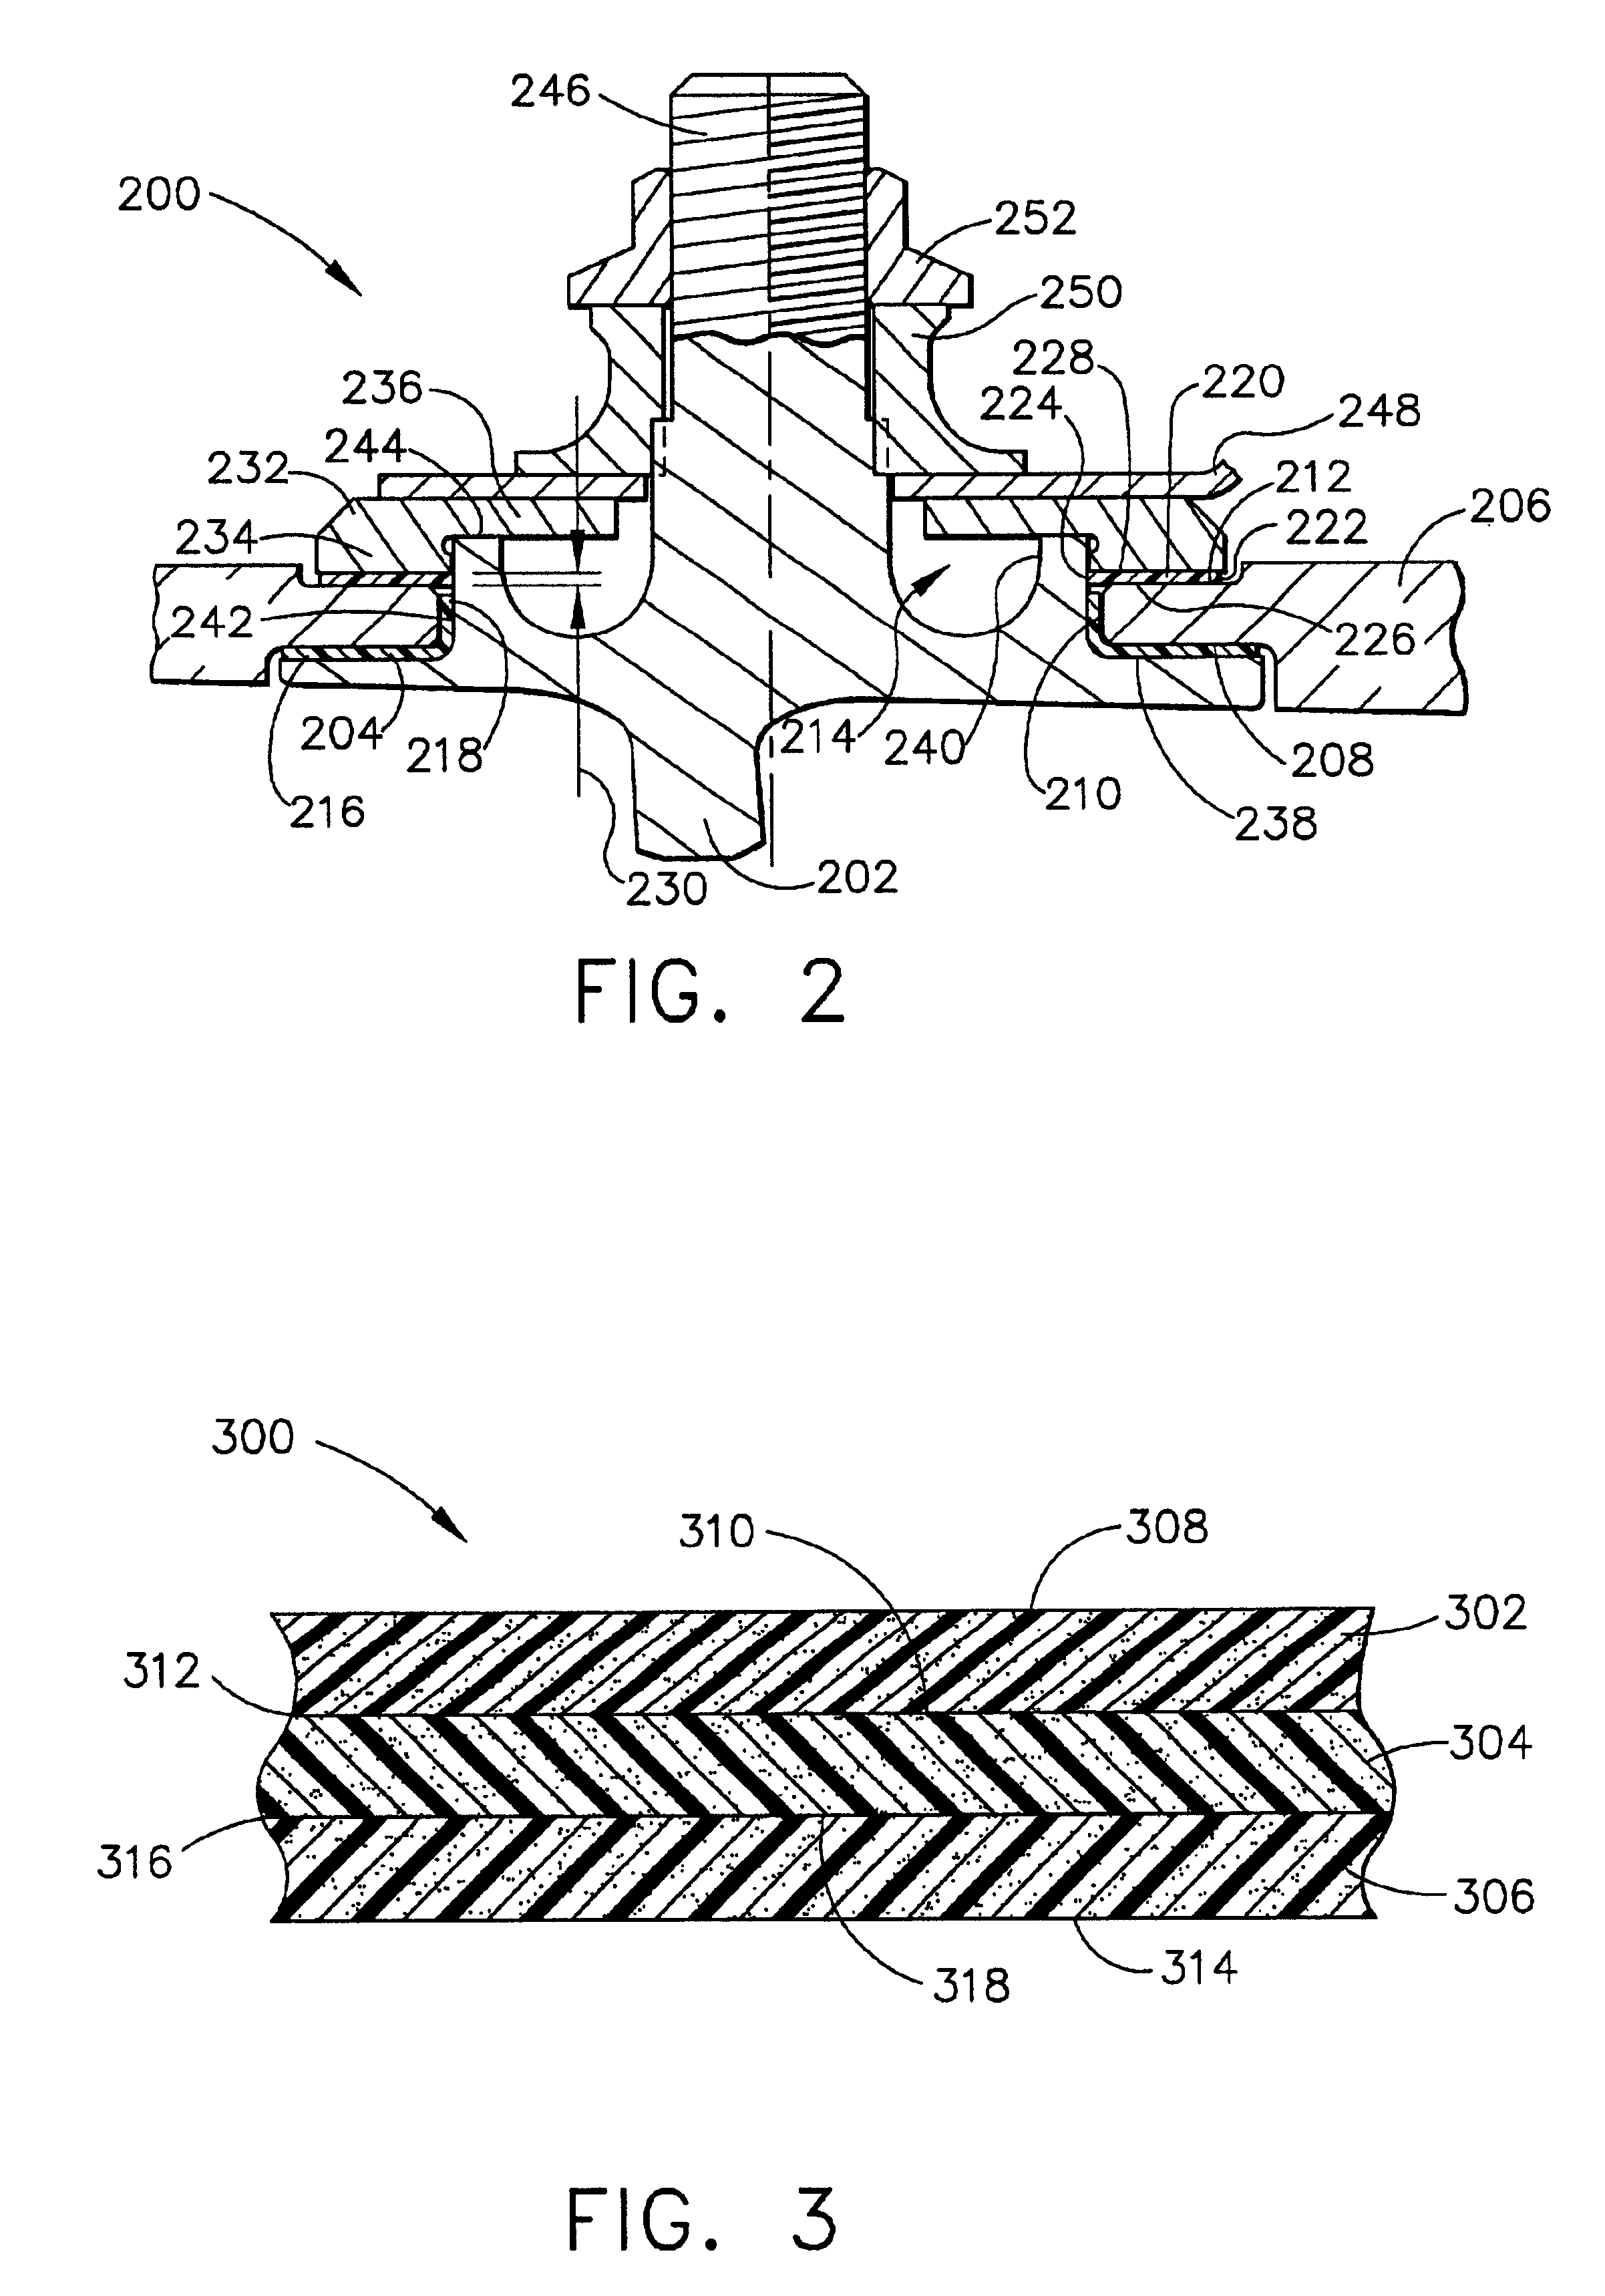 Method of manufacturing variable vane seal and washer materials